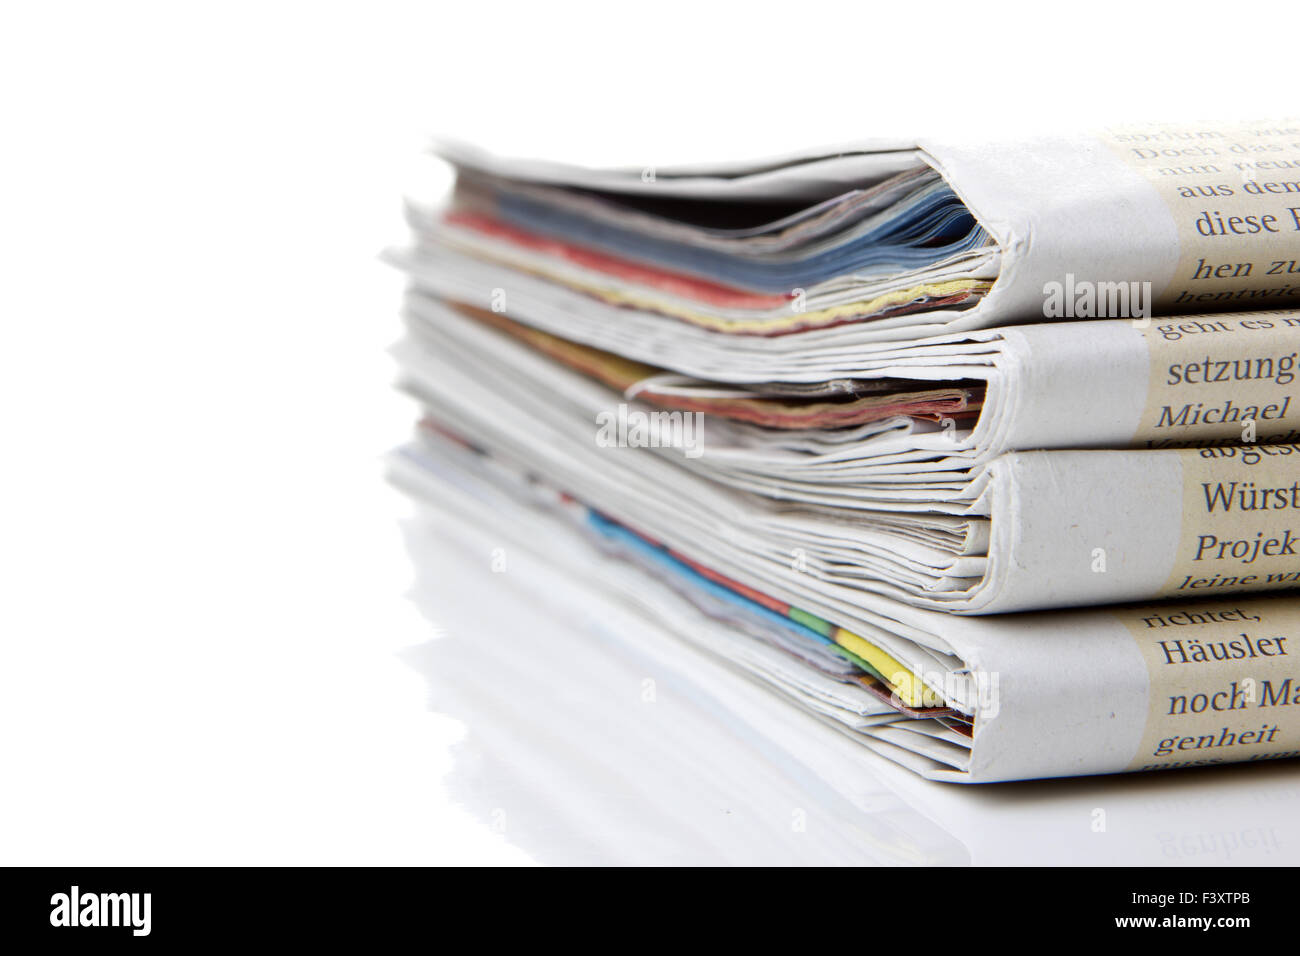 several newspapers, journals stacked on white Stock Photo